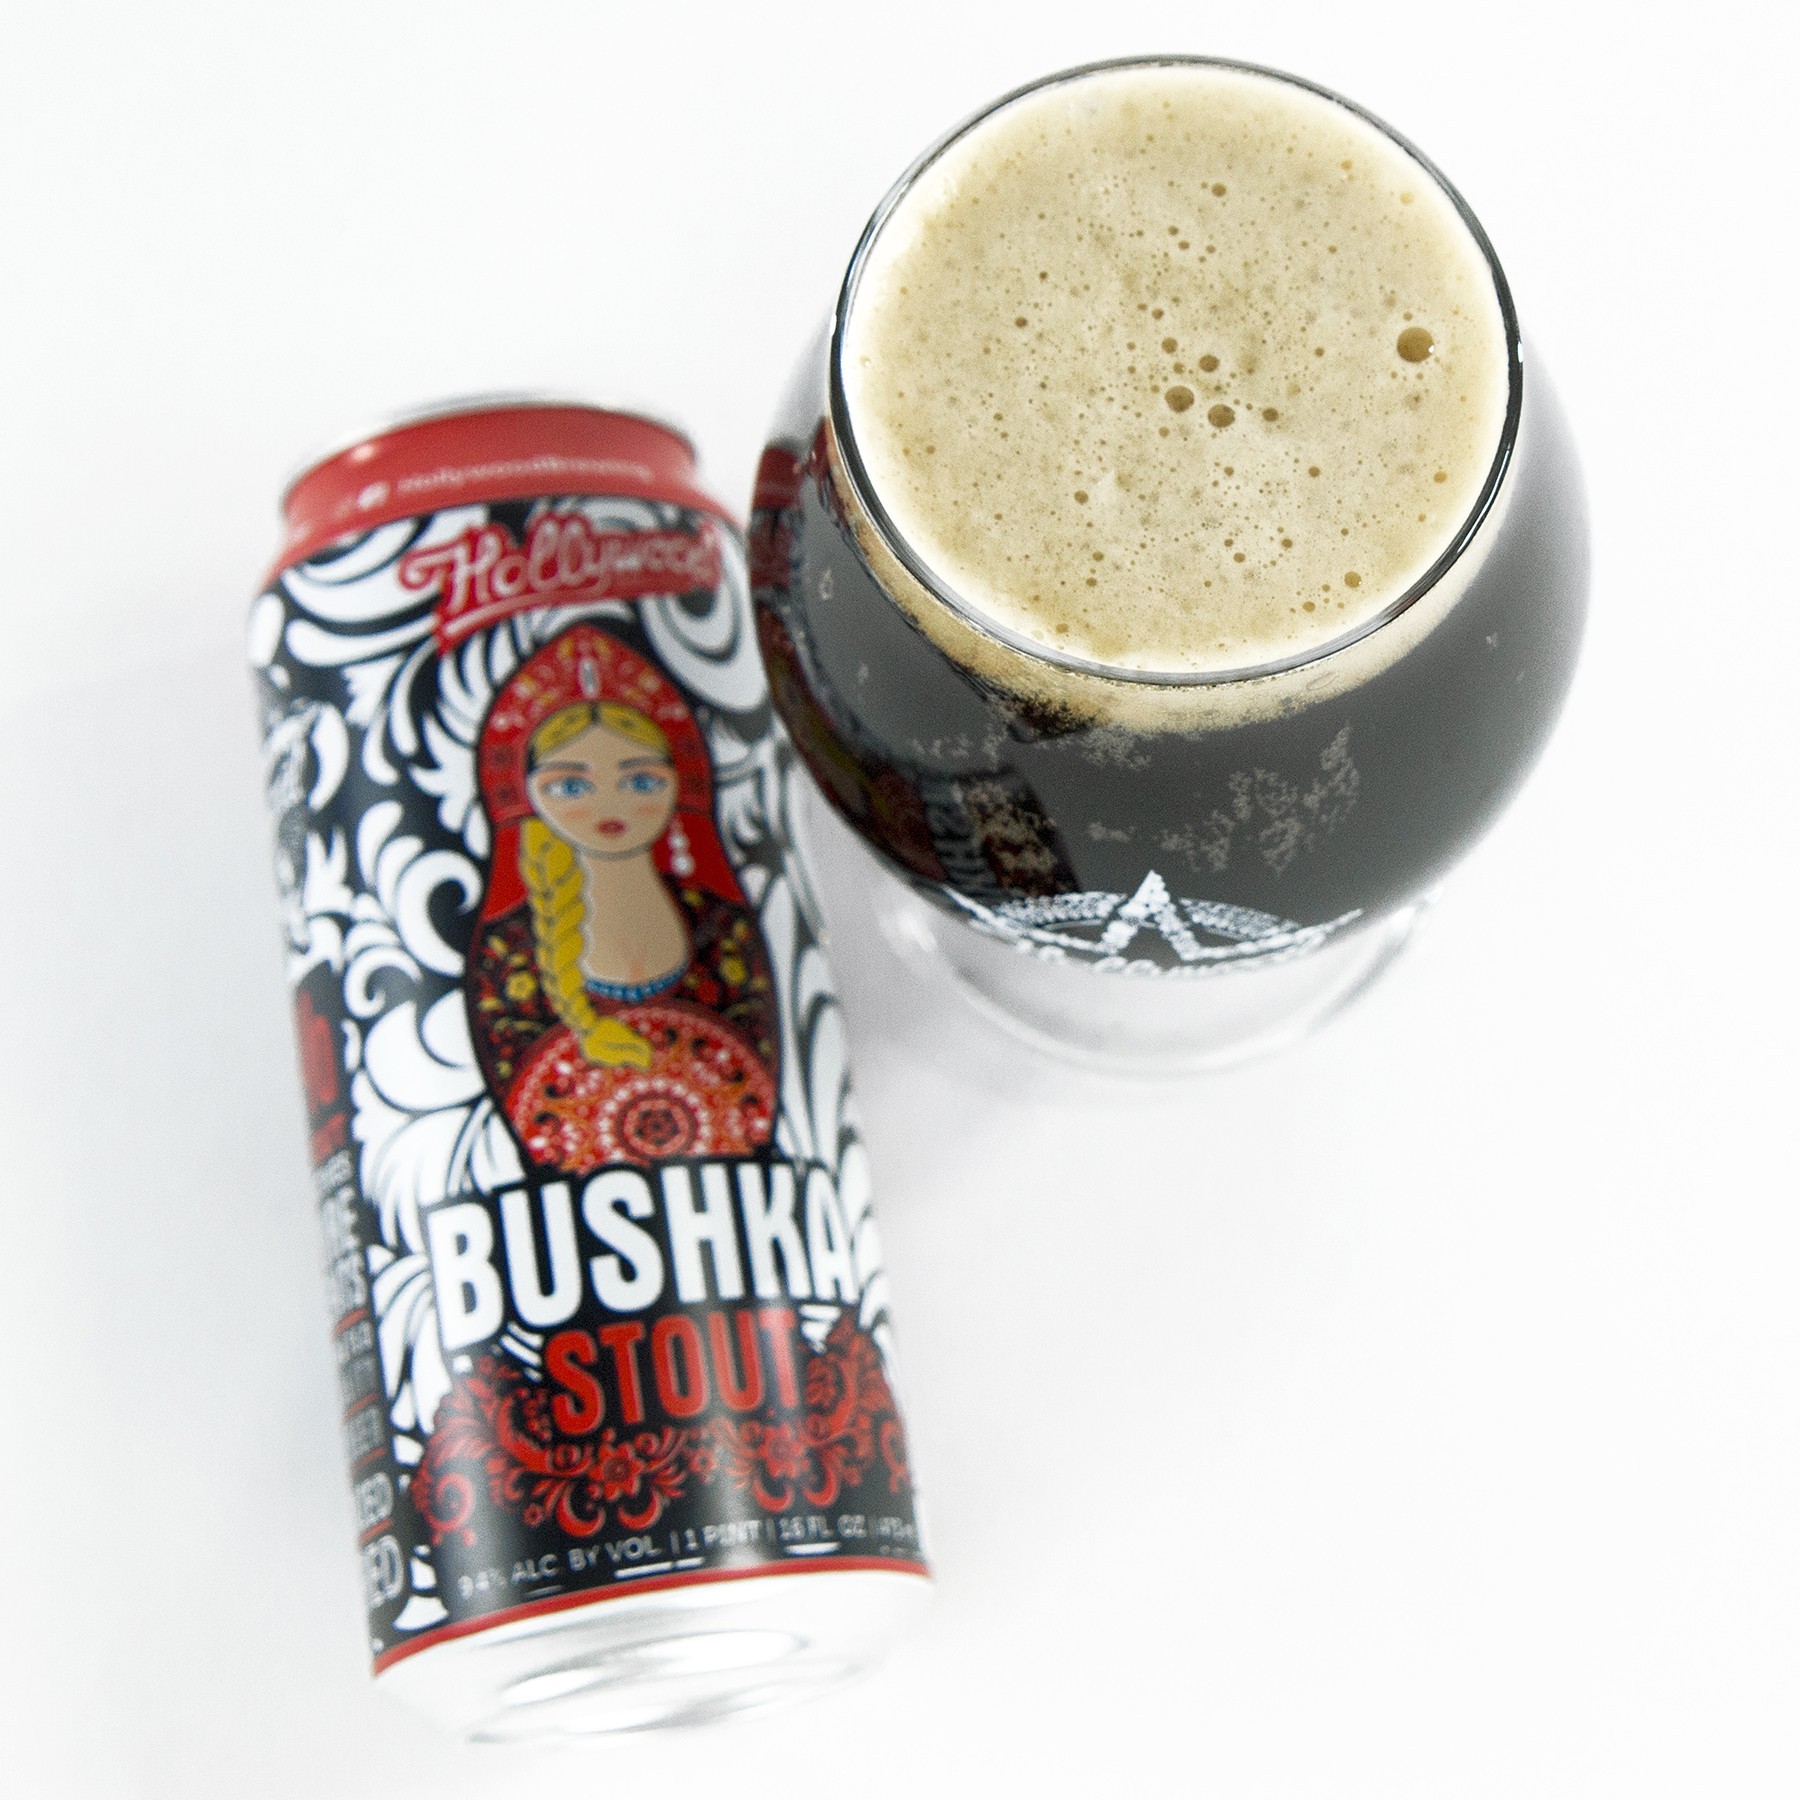 Hollywood Brewing's Bushka Russian imperial stout. - COURTESY OF HOLLYWOOD BREWING CO.